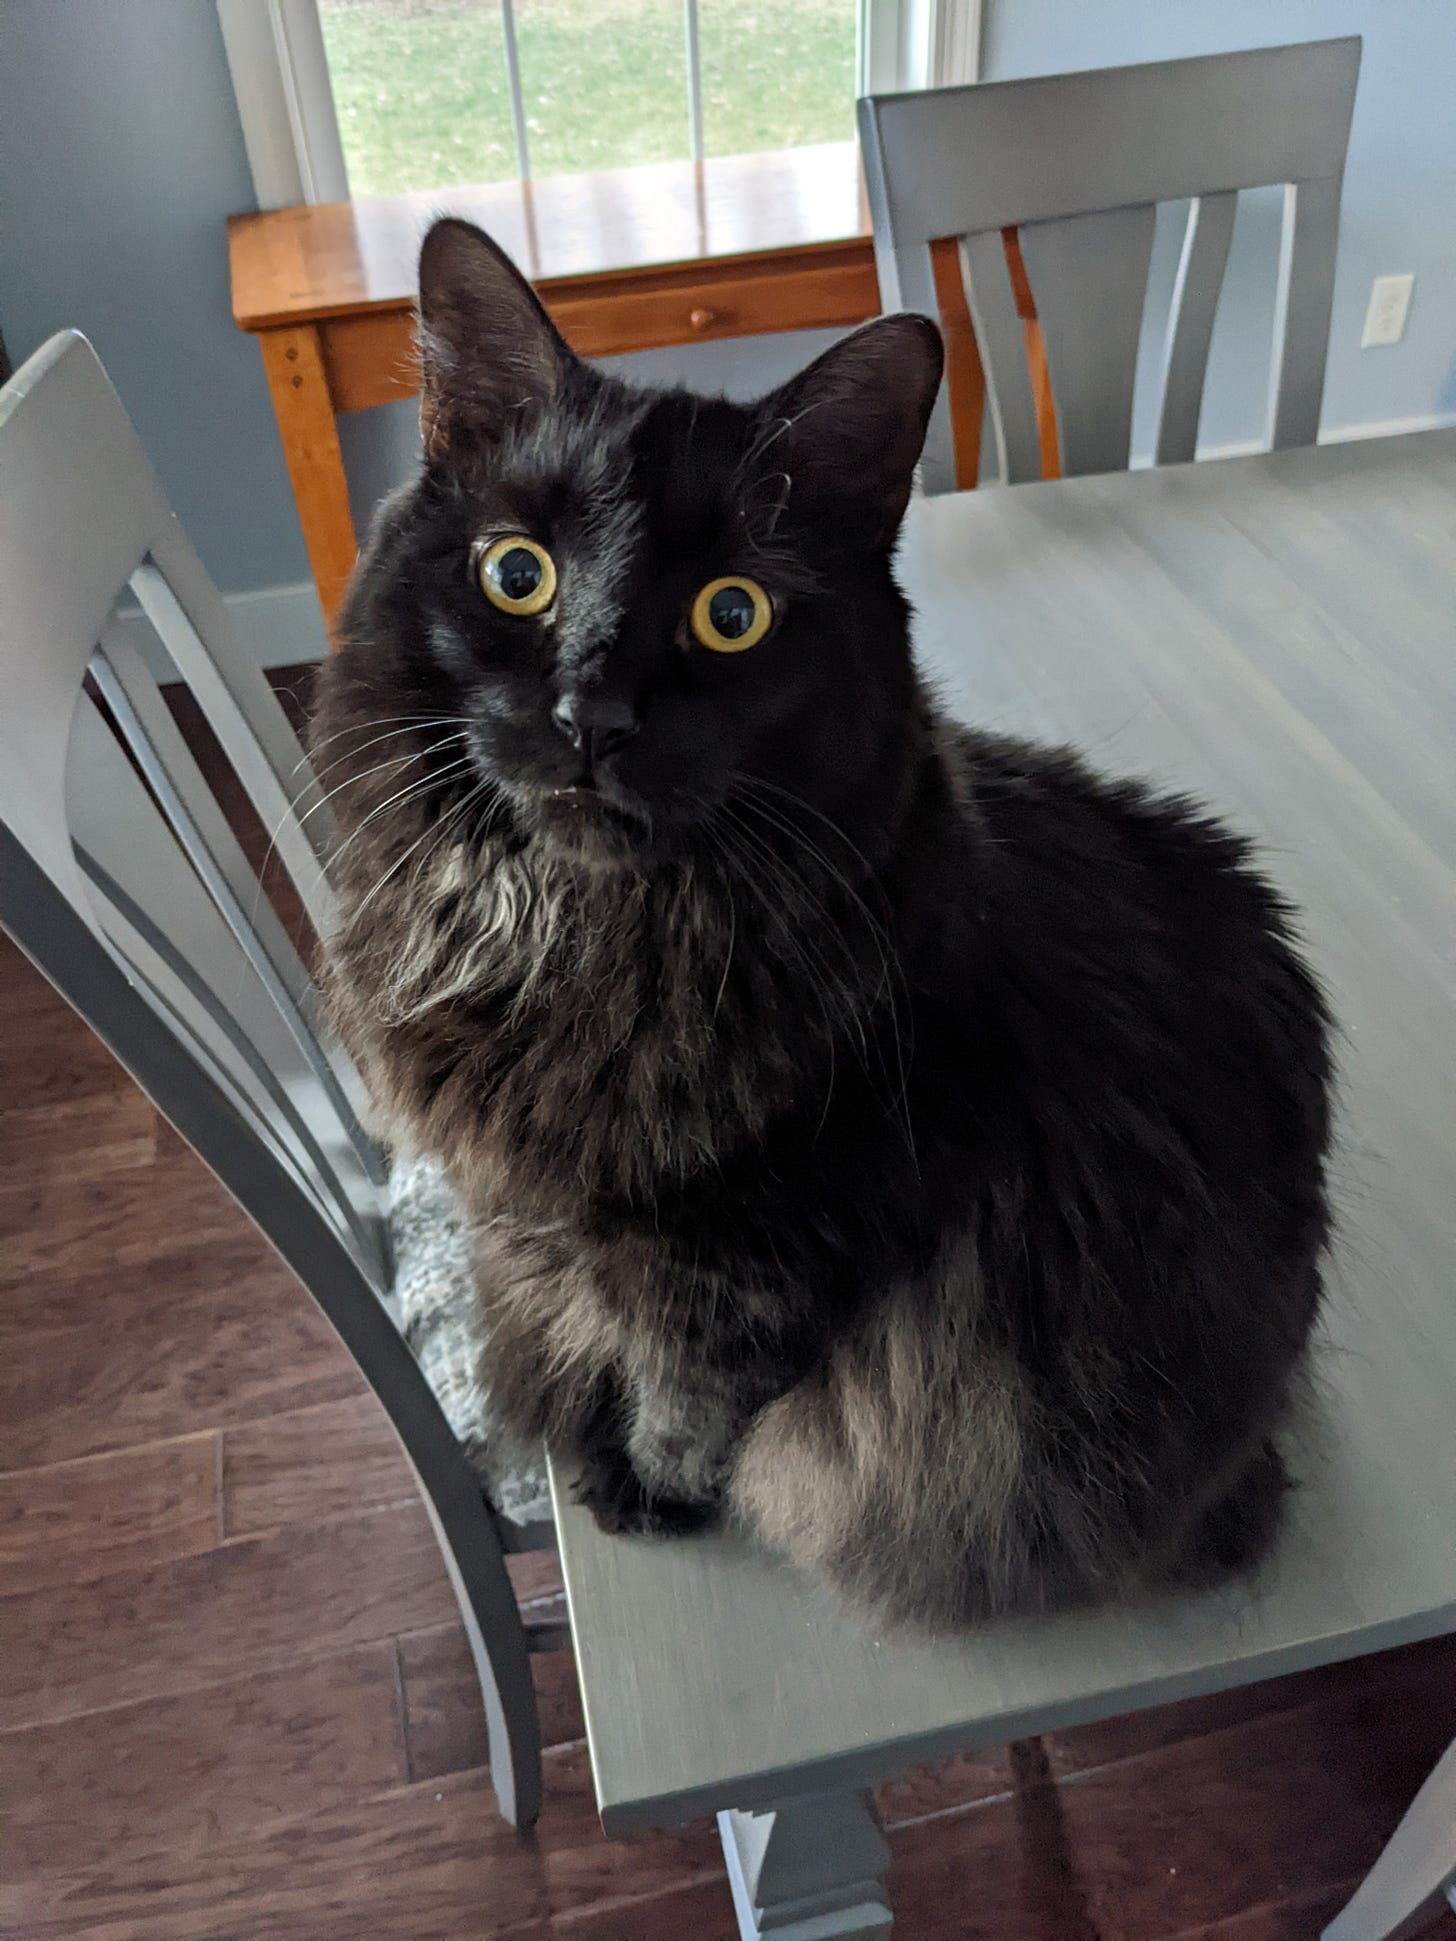 A fluffy black cat with big eyes sitting on a gray table